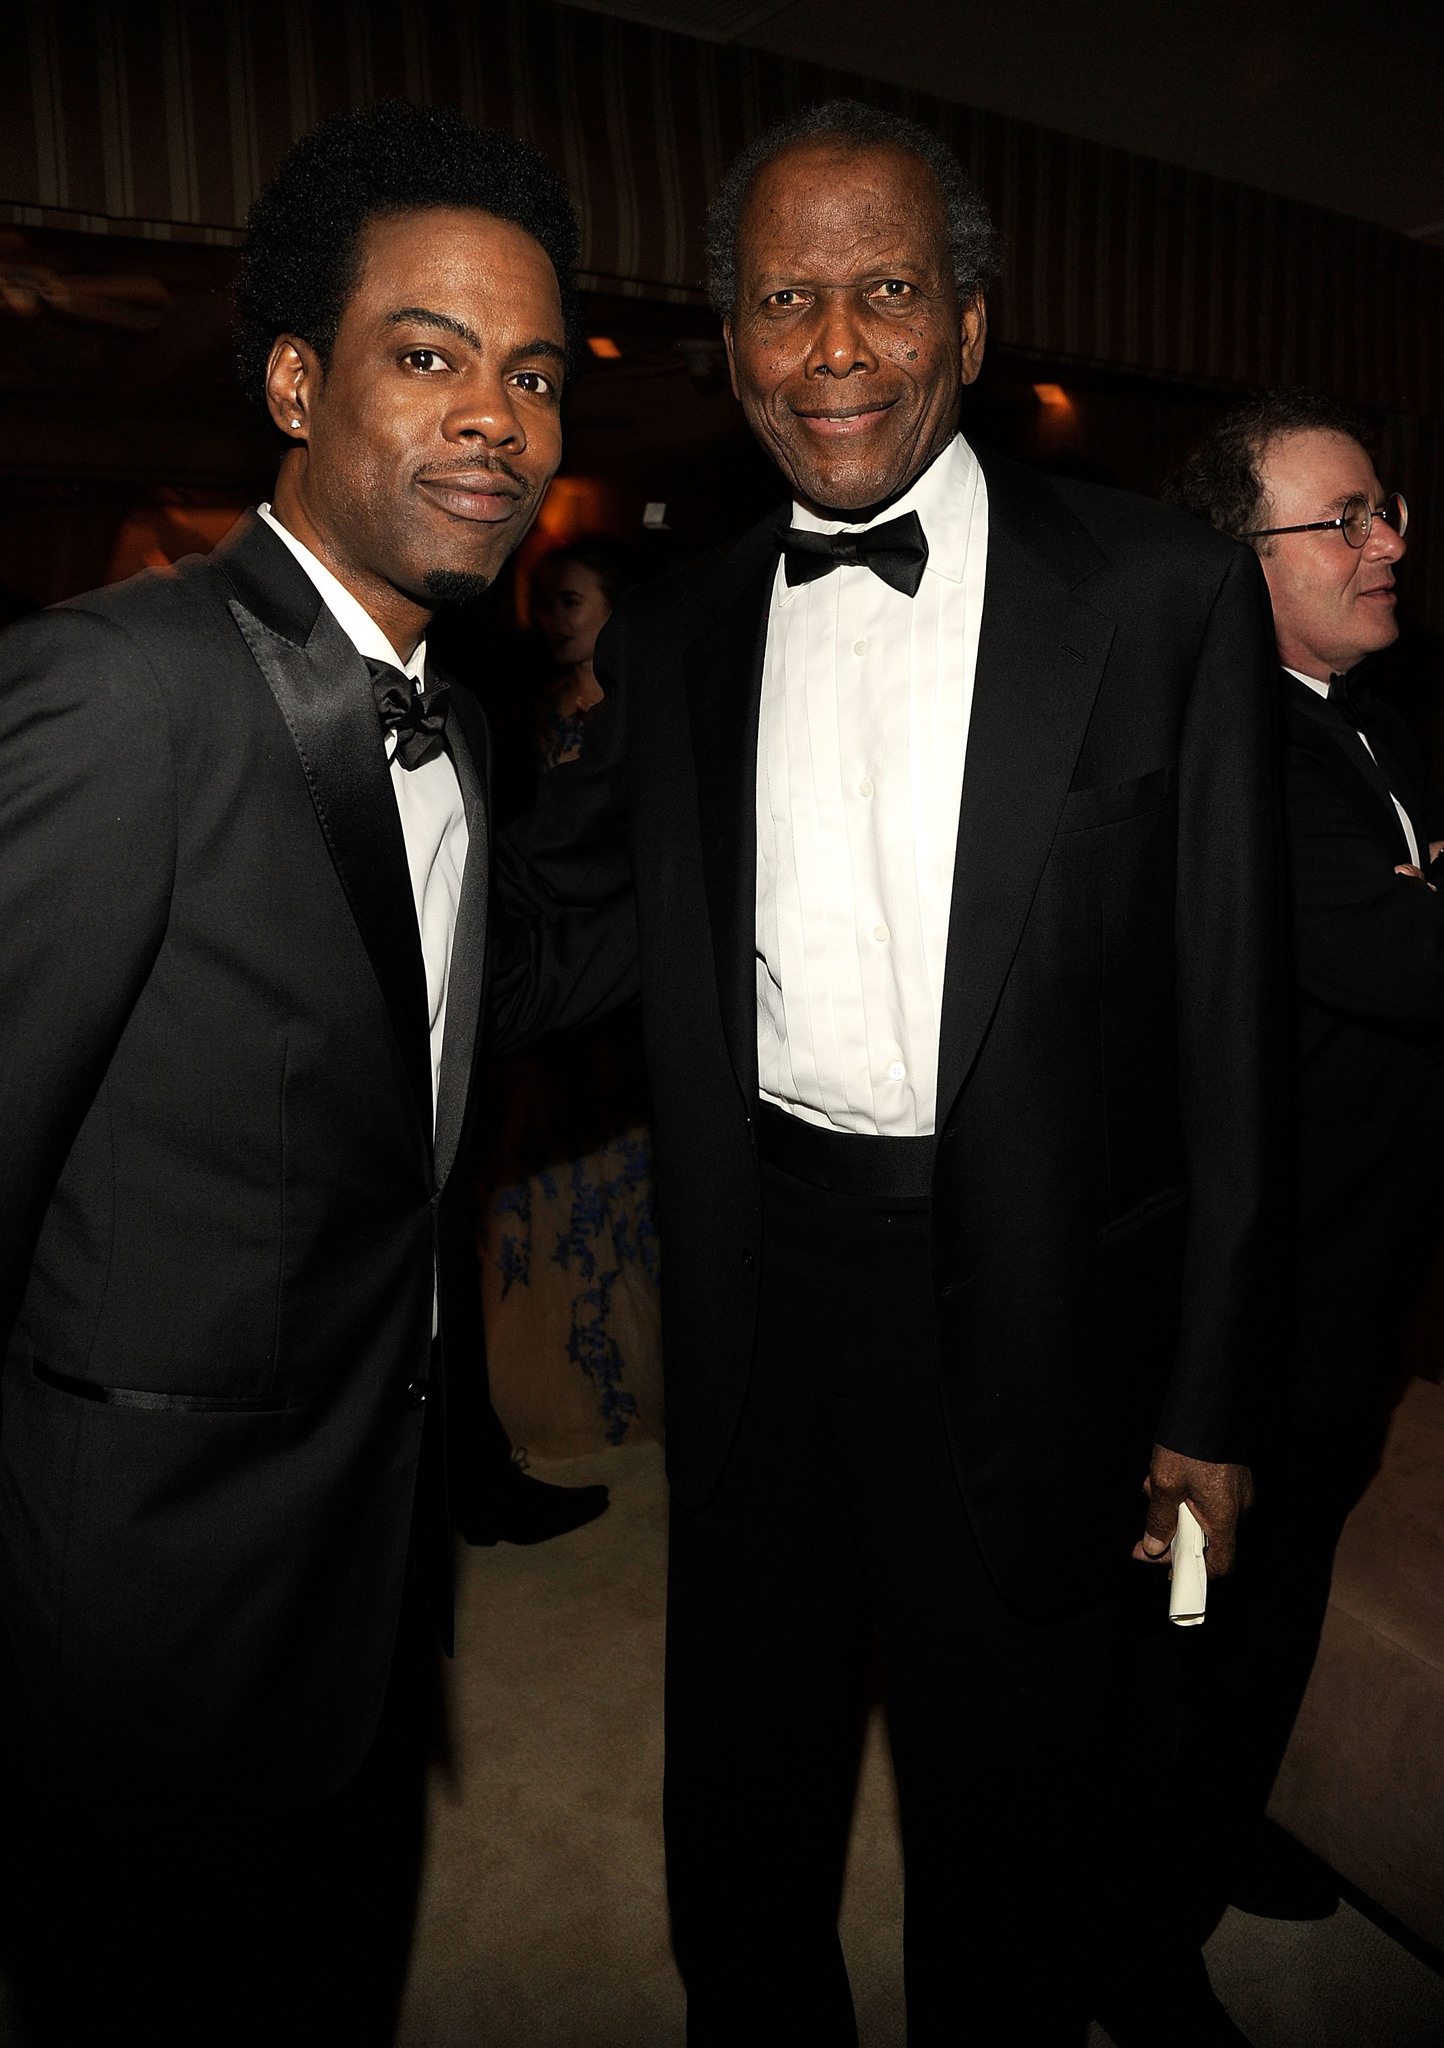 Sidney Poitier and Chris Rock